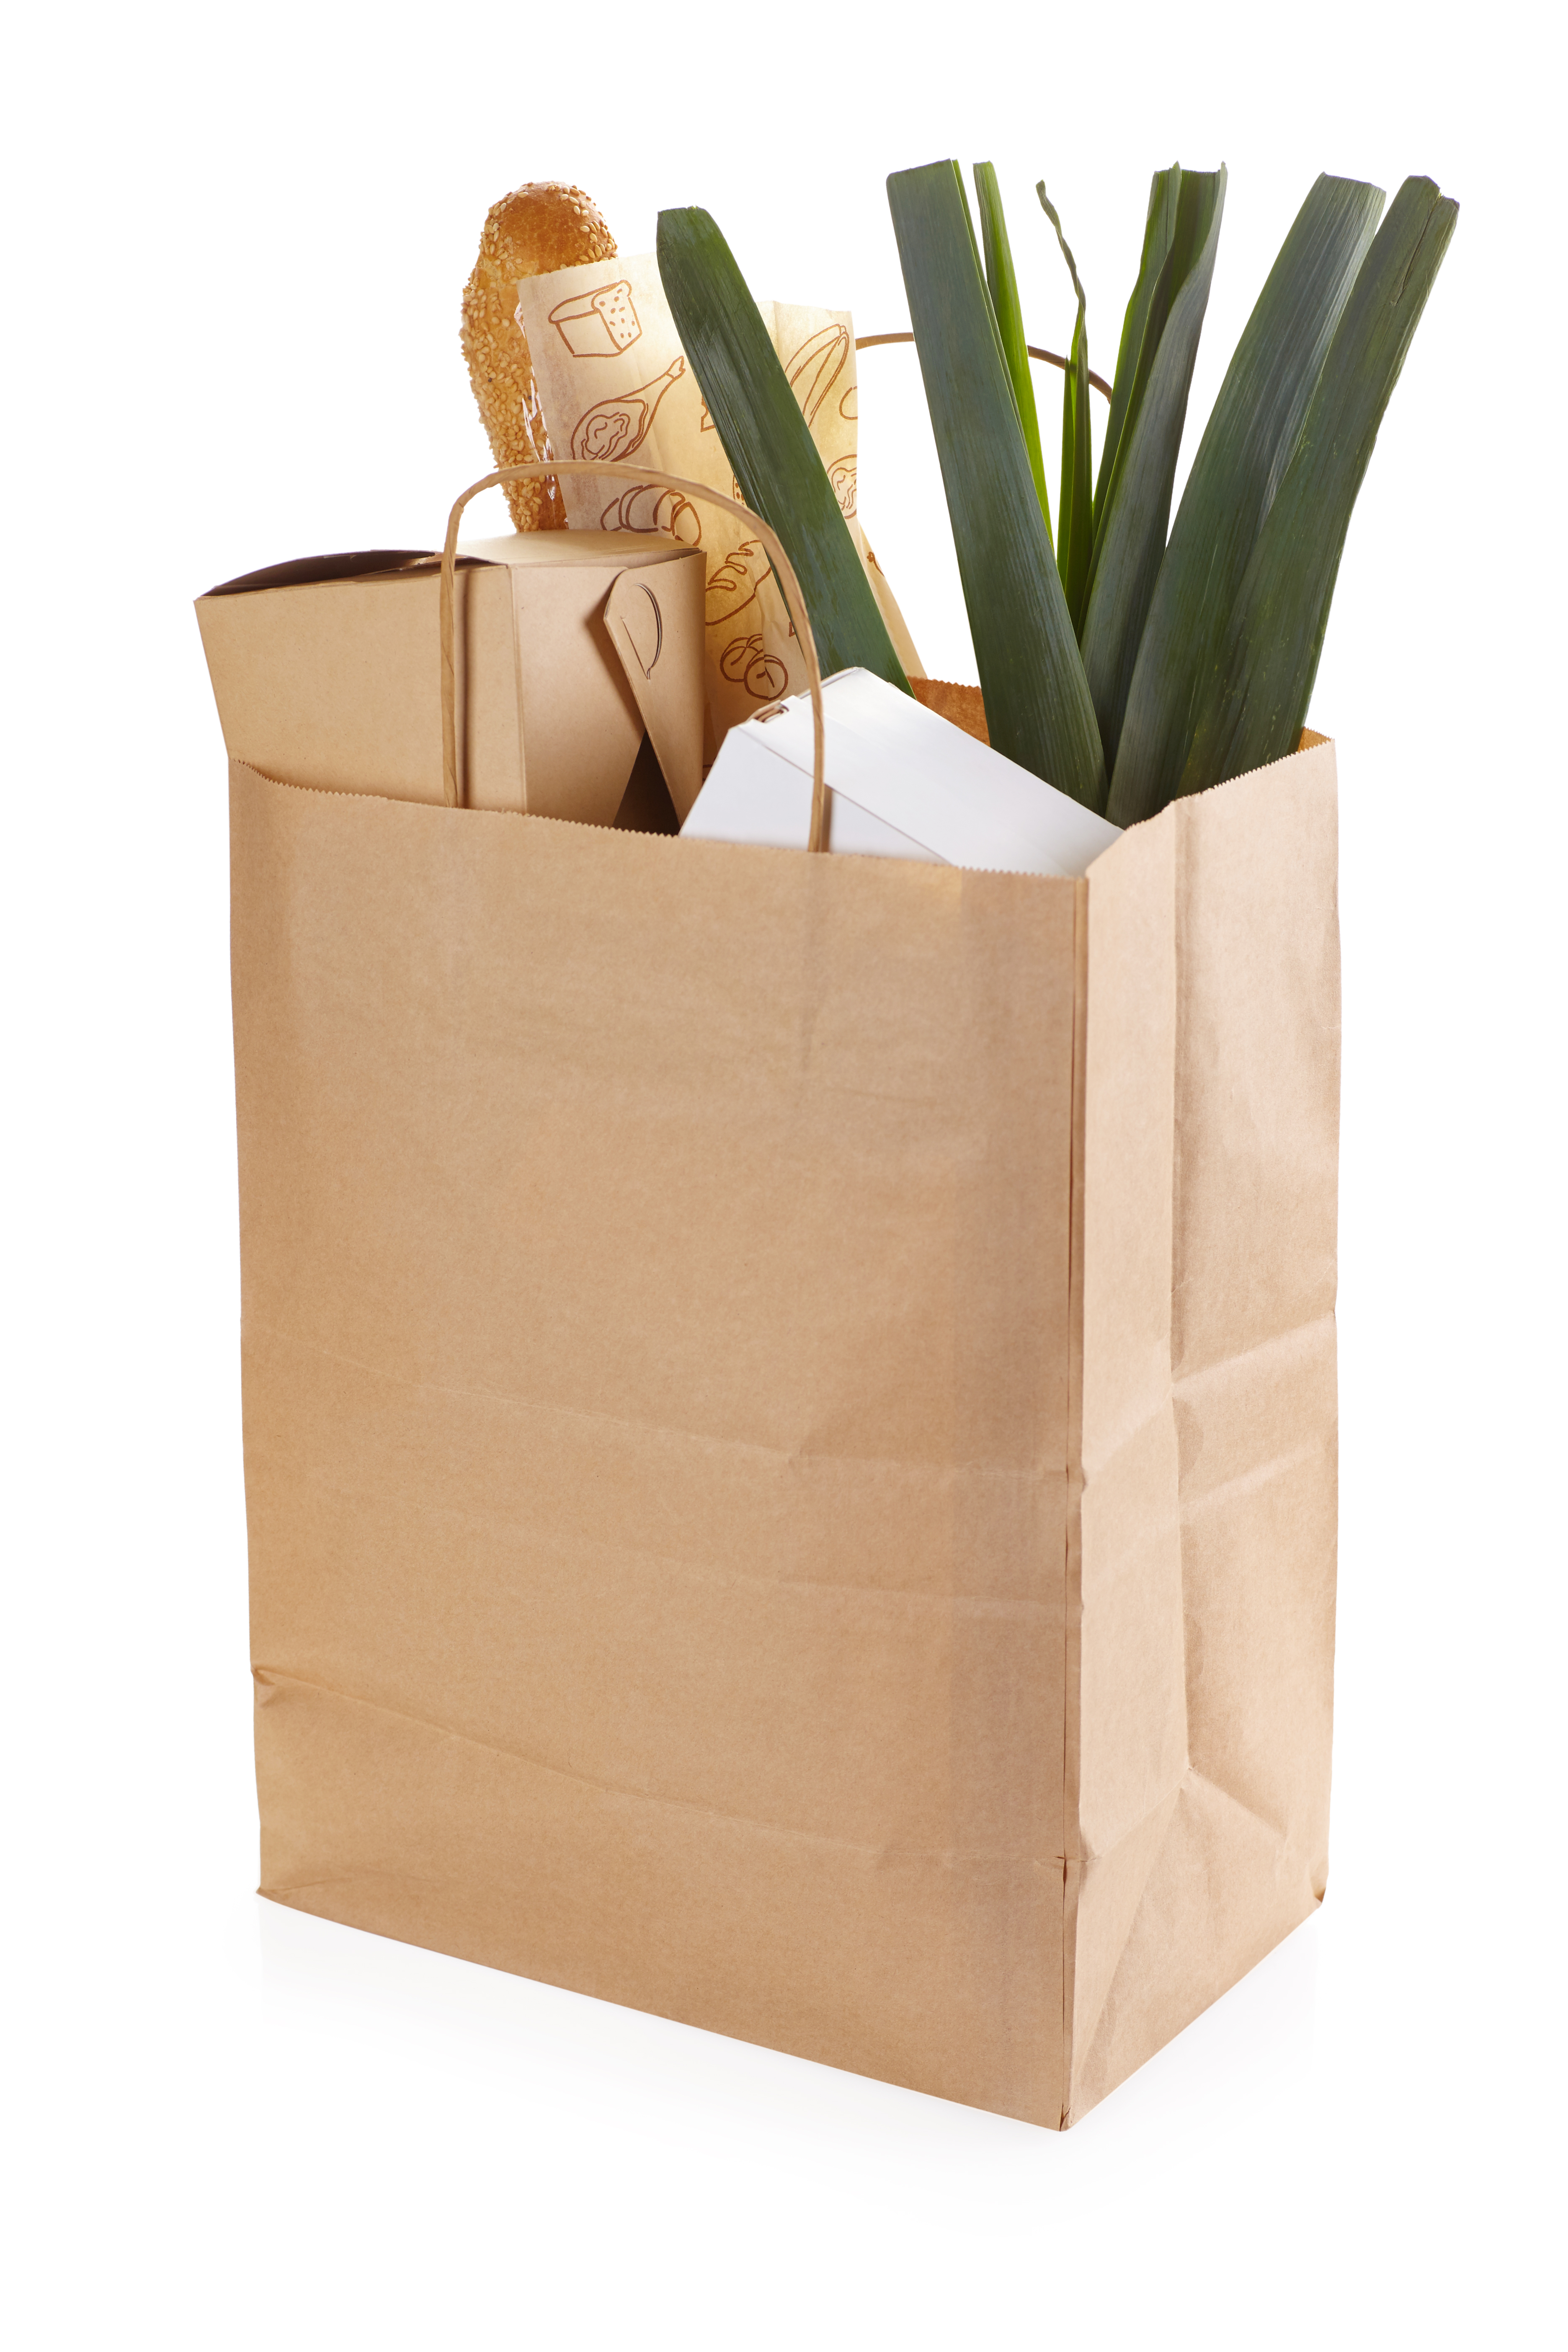 OSQ CarrBag tw 260 paper bags with handles